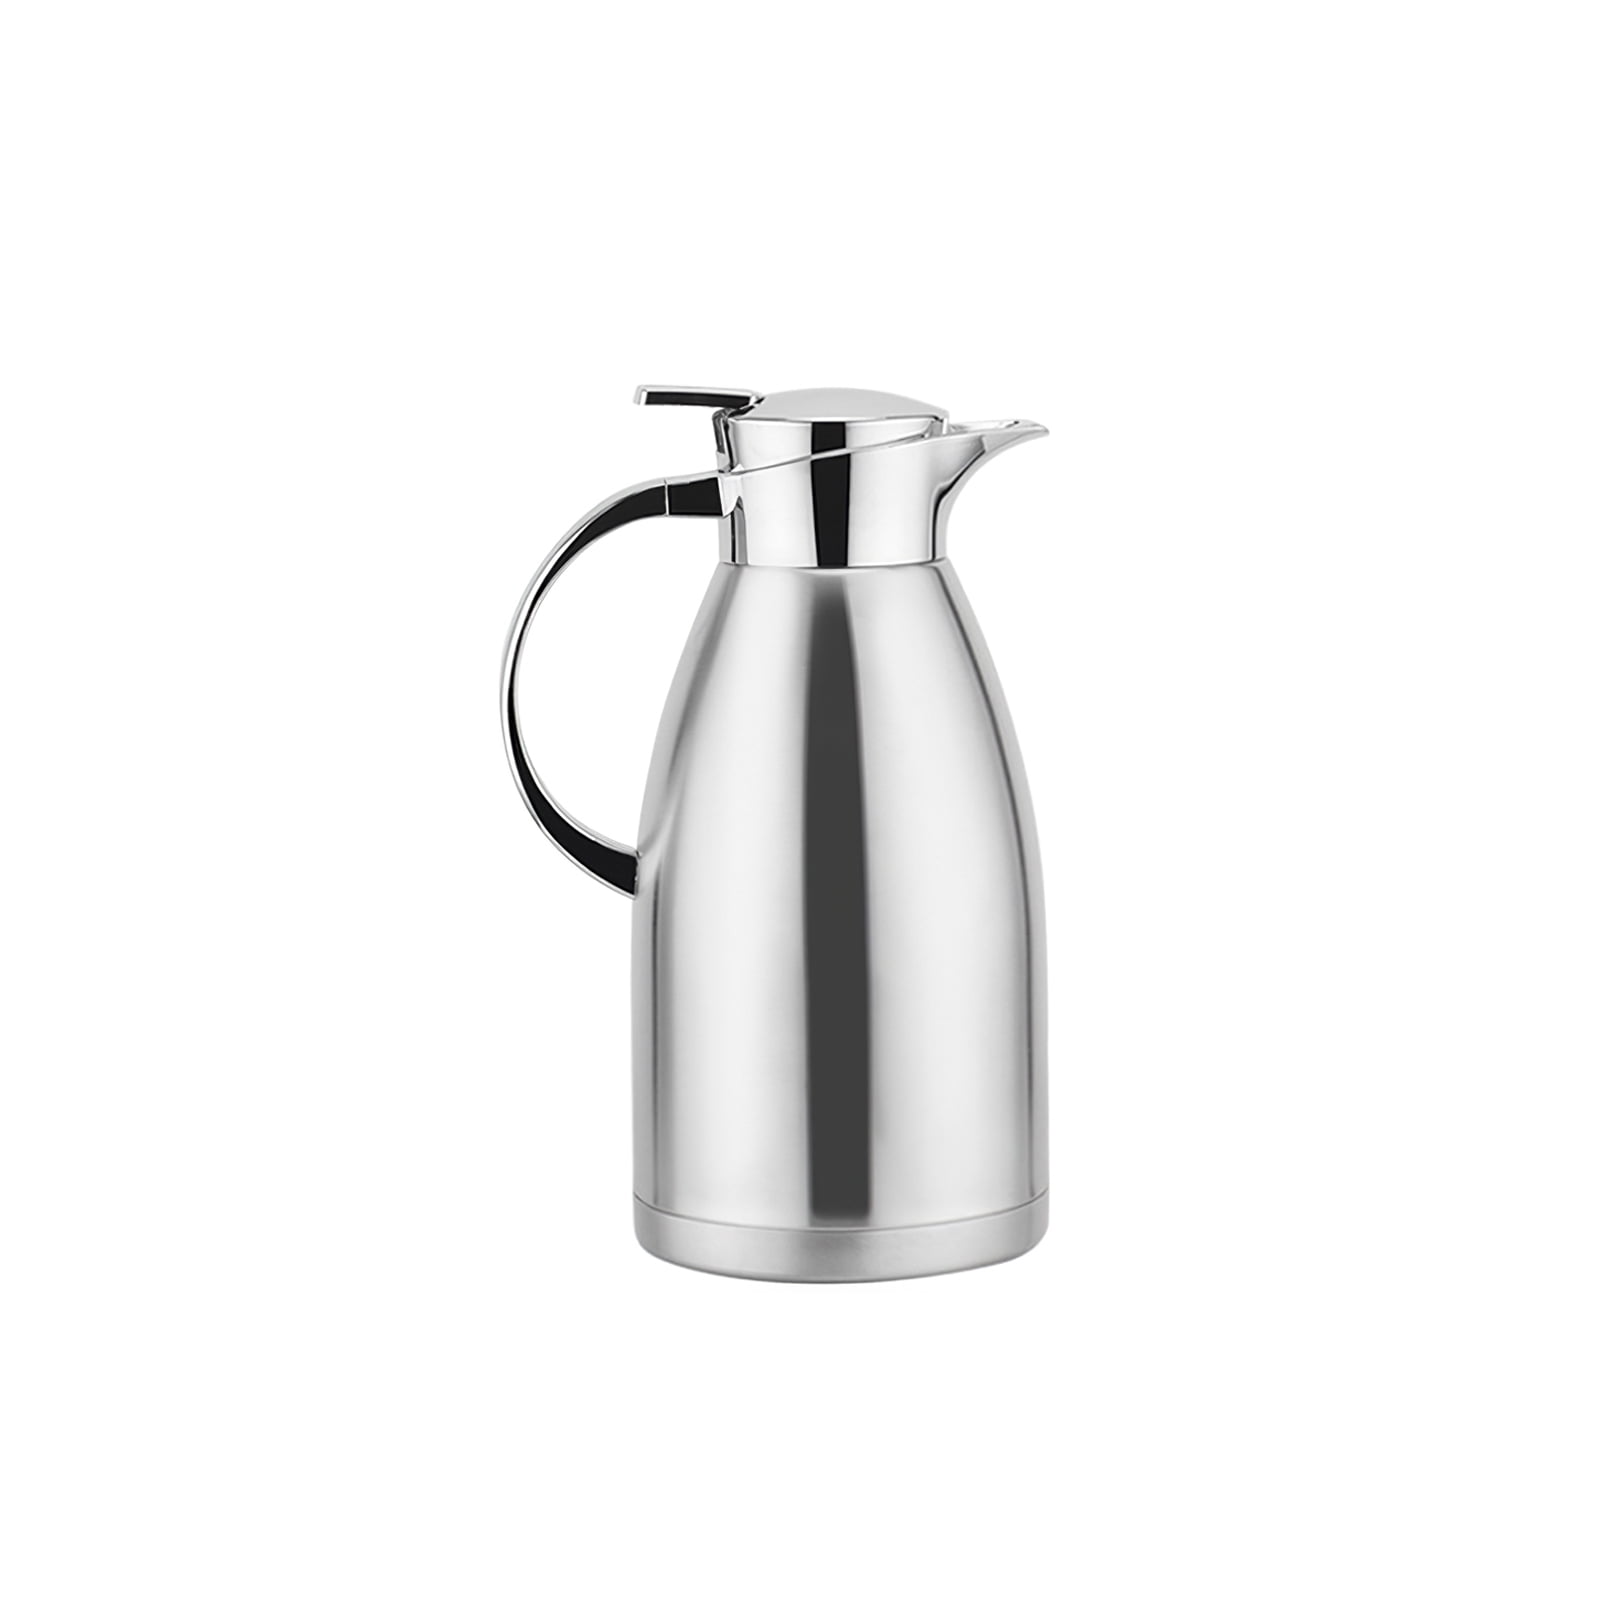 ALFI Insulated jug Powder Green 1 Litre Stainless Steel